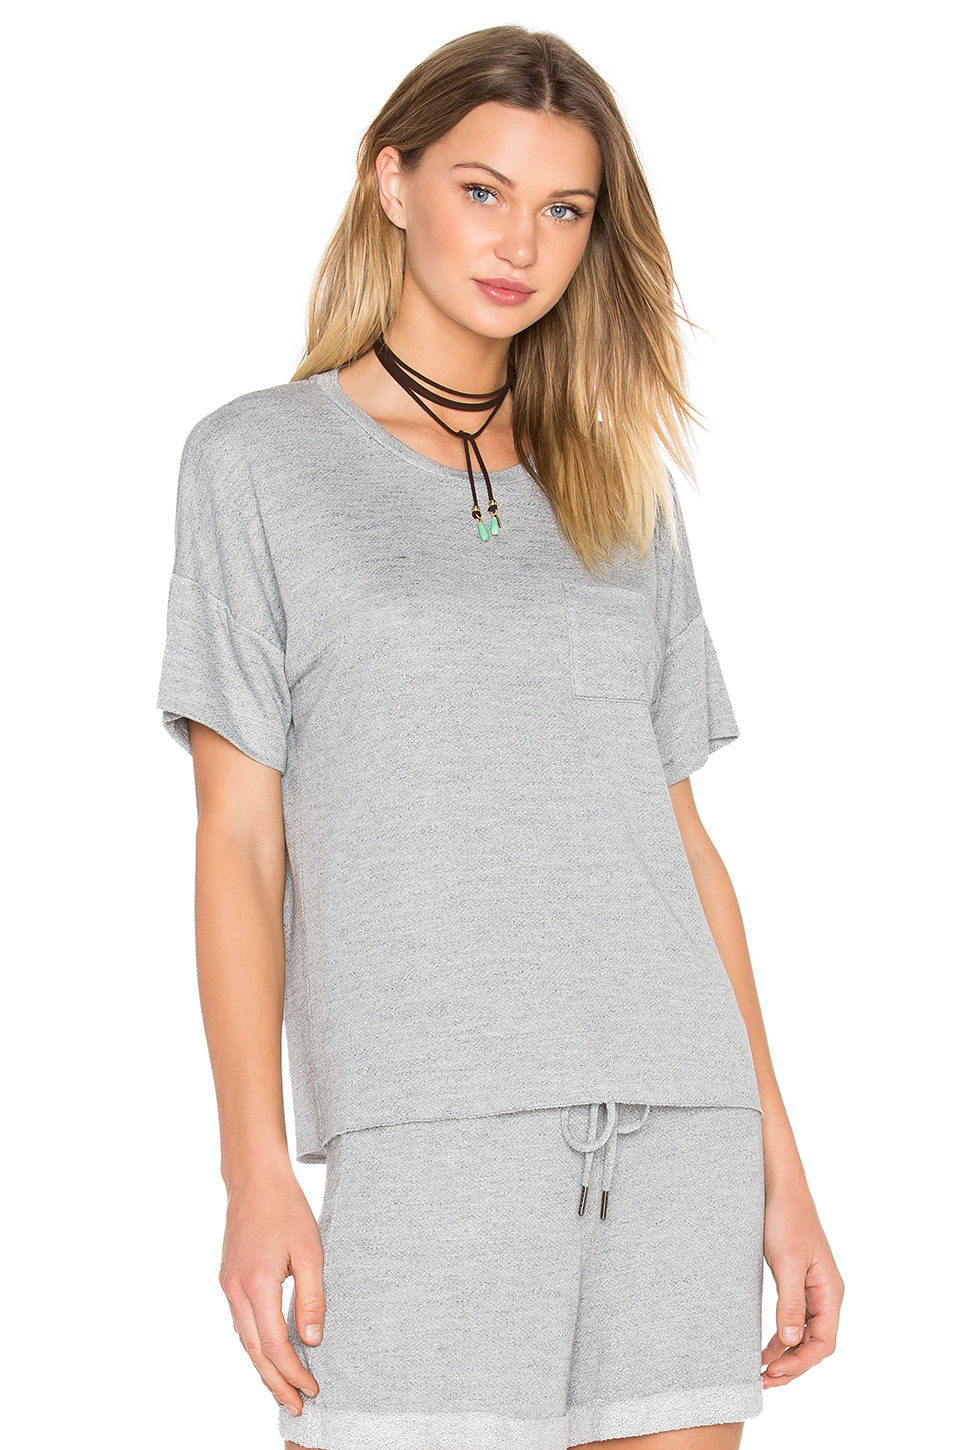 Lyst - Stateside Lightweight French Terry Crew Neck Tee in Gray